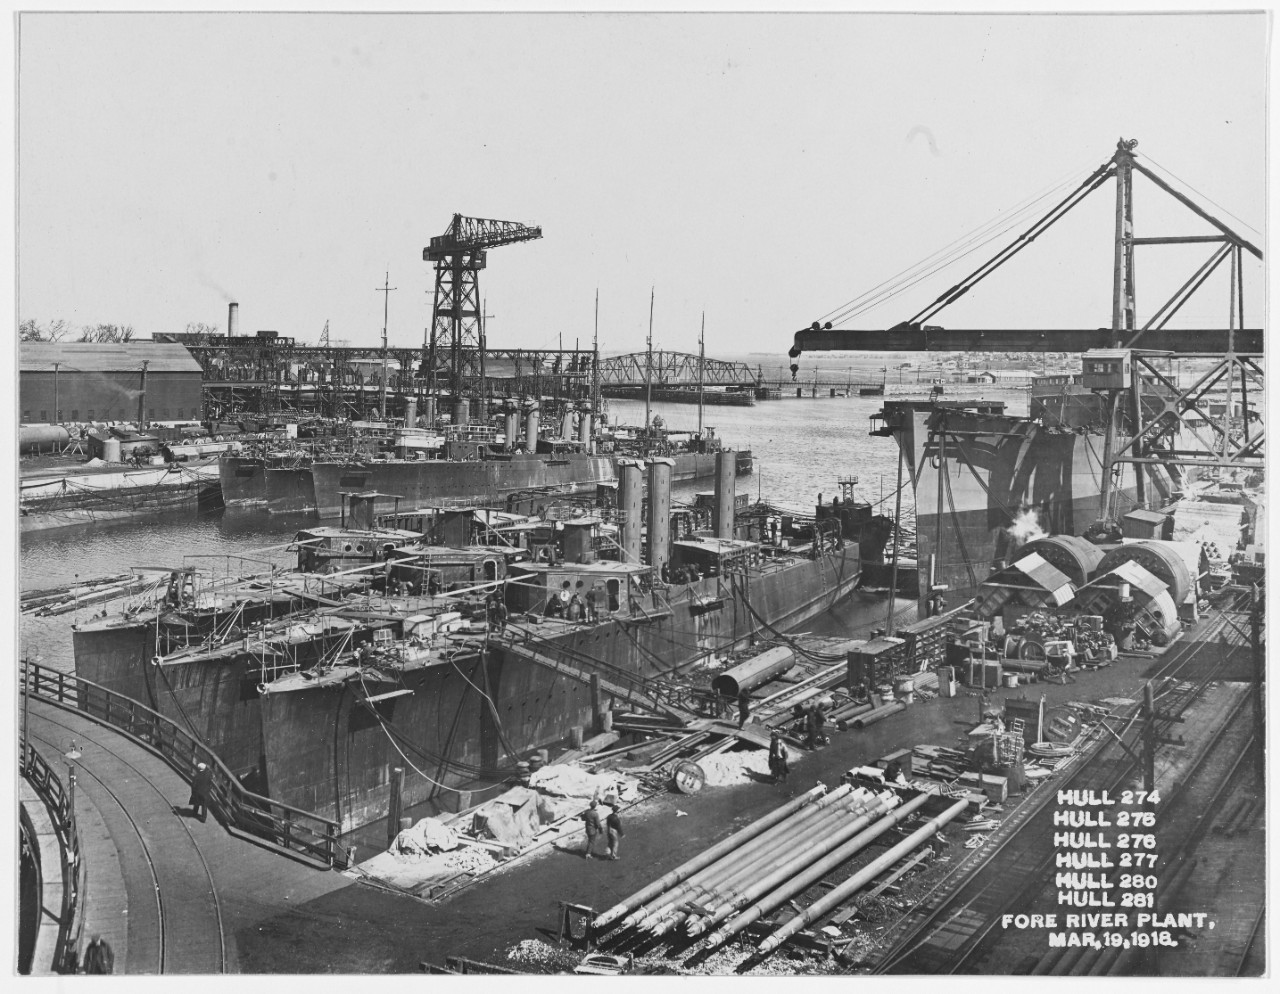 Photo #: NH 43022  Fore River Shipbuilding Company, Quincy, Massachusetts